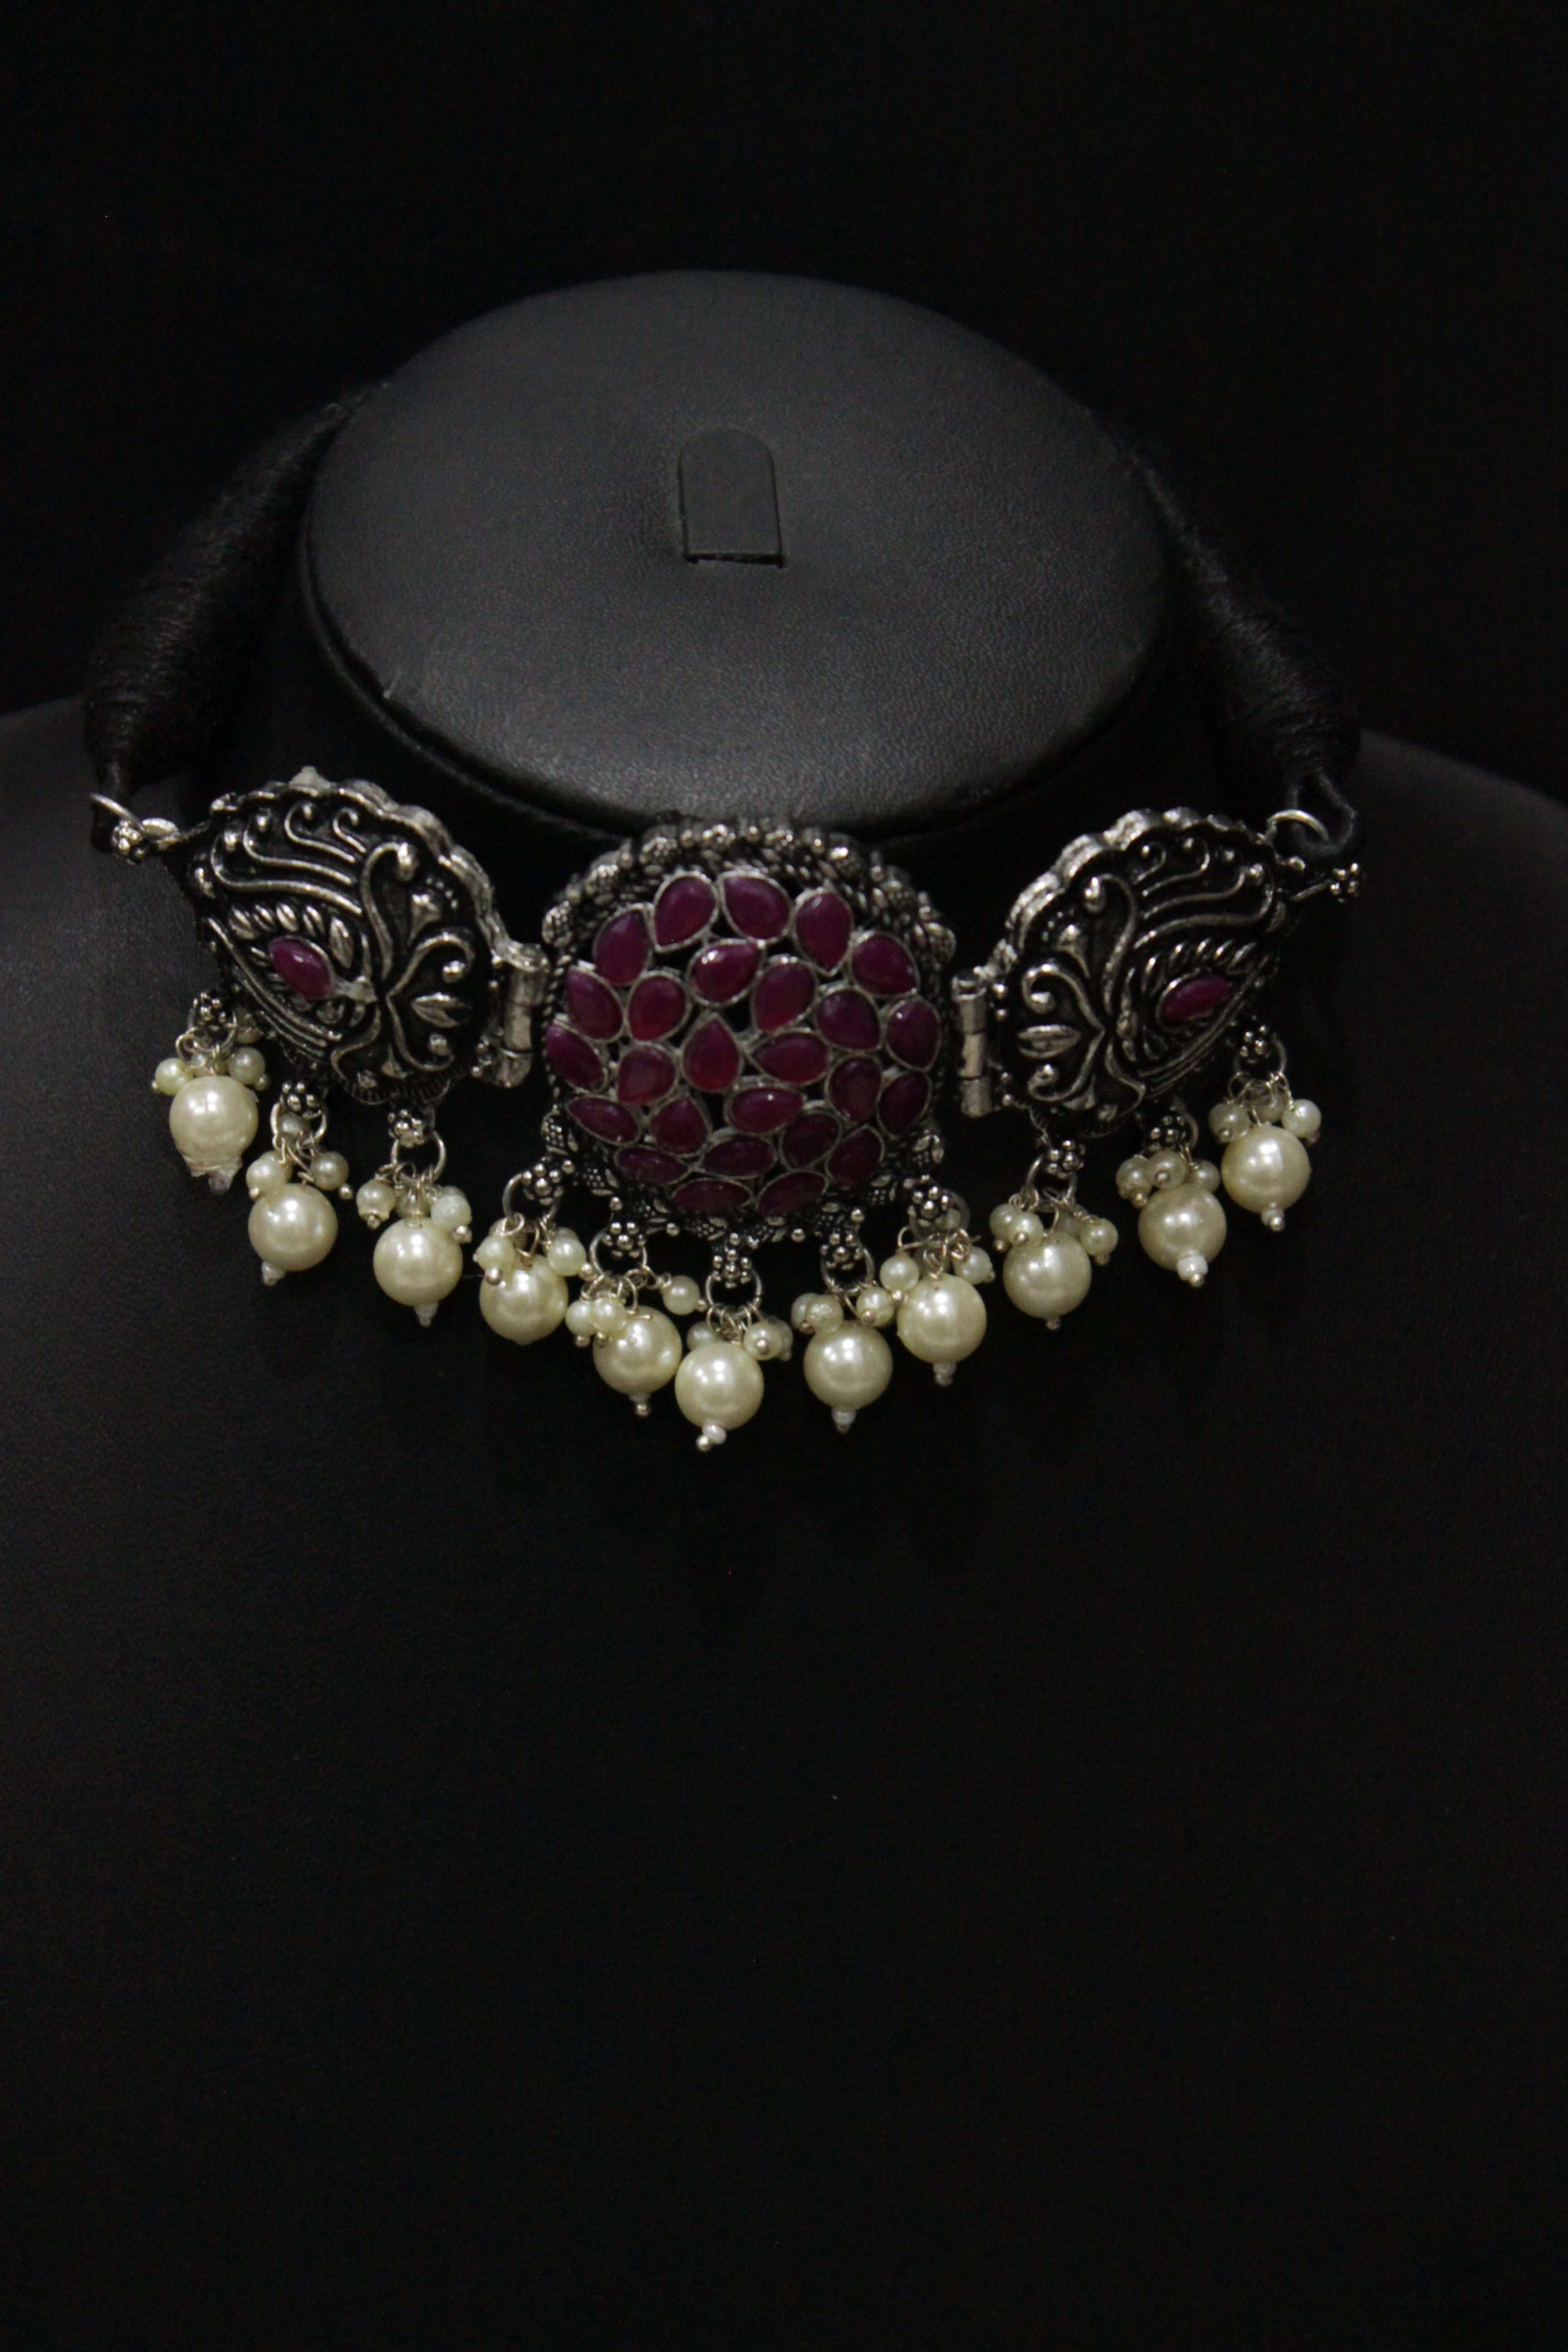 Vibrant Festive Choker Necklace Set with Fuchsia Glass Beads and Thread Closure